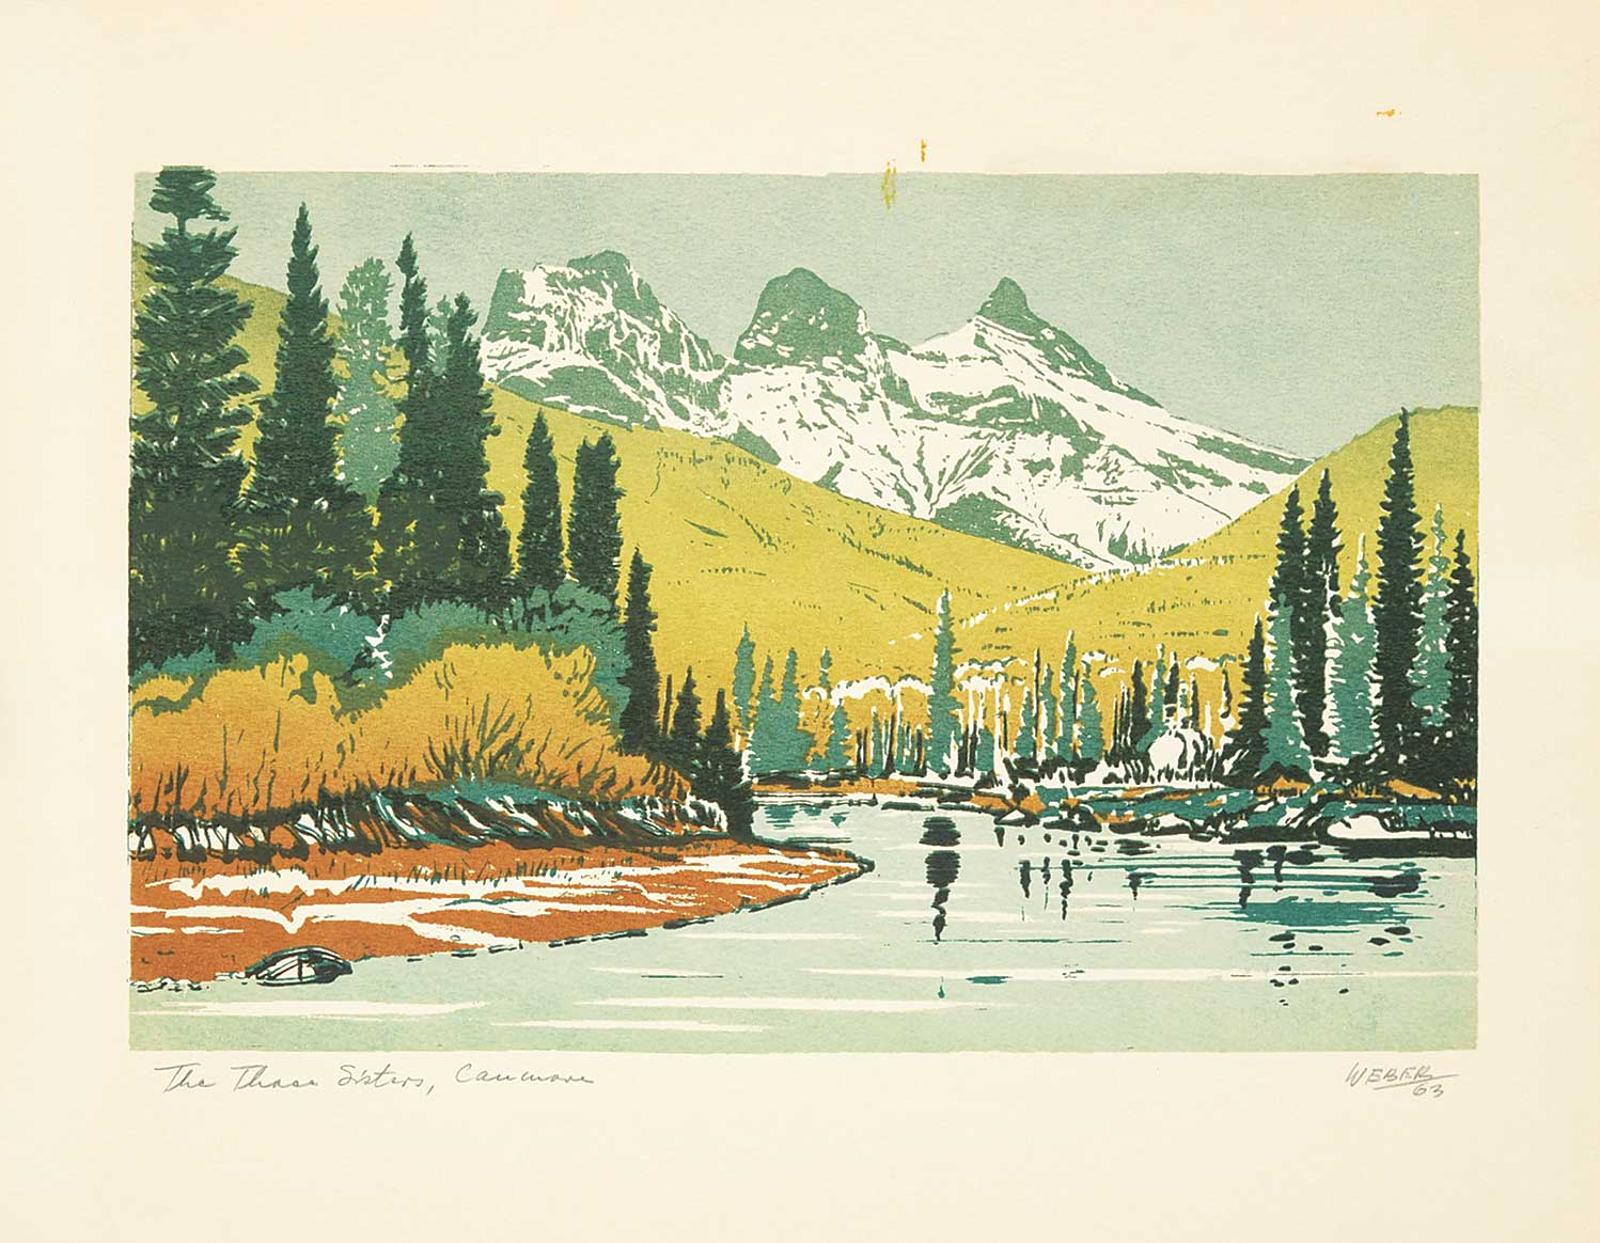 George Weber (1907-2002) - The Three Sisters, Canmore